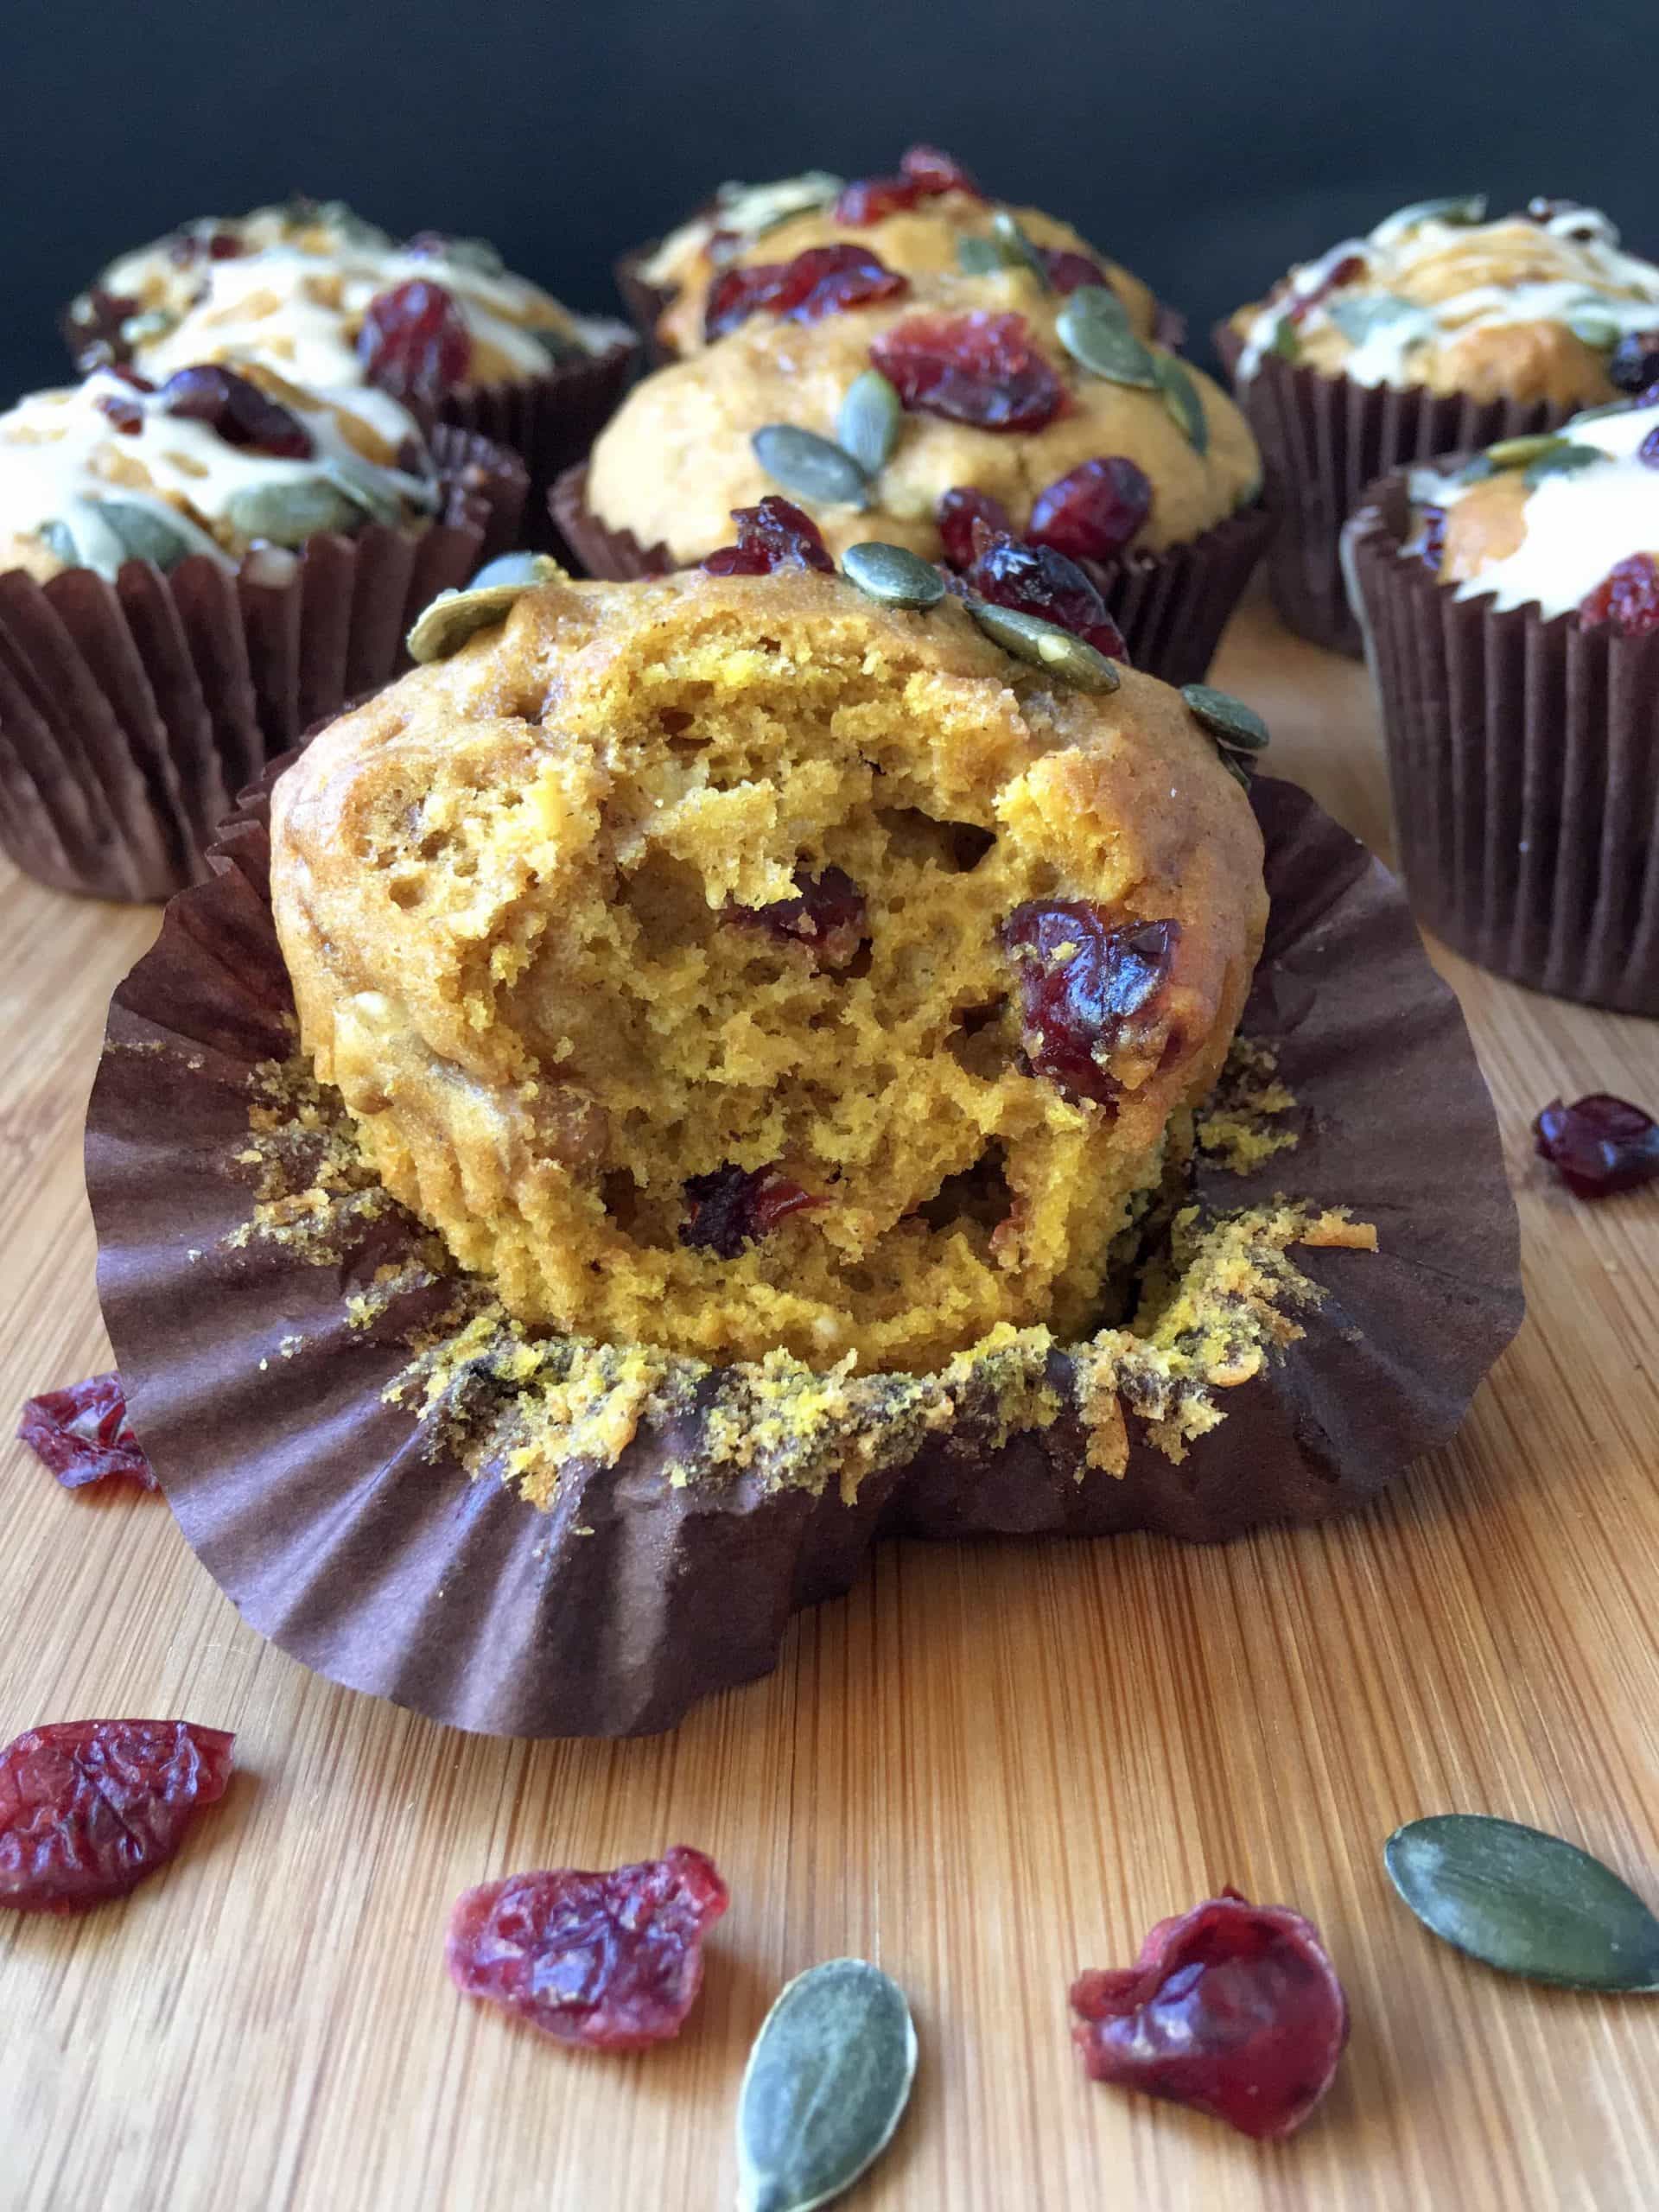 a pumpkin muffin with cranberries on a wooden board, cut open to reveal the inside. Cranberries and pumpkin seeds are scattered around the muffin.